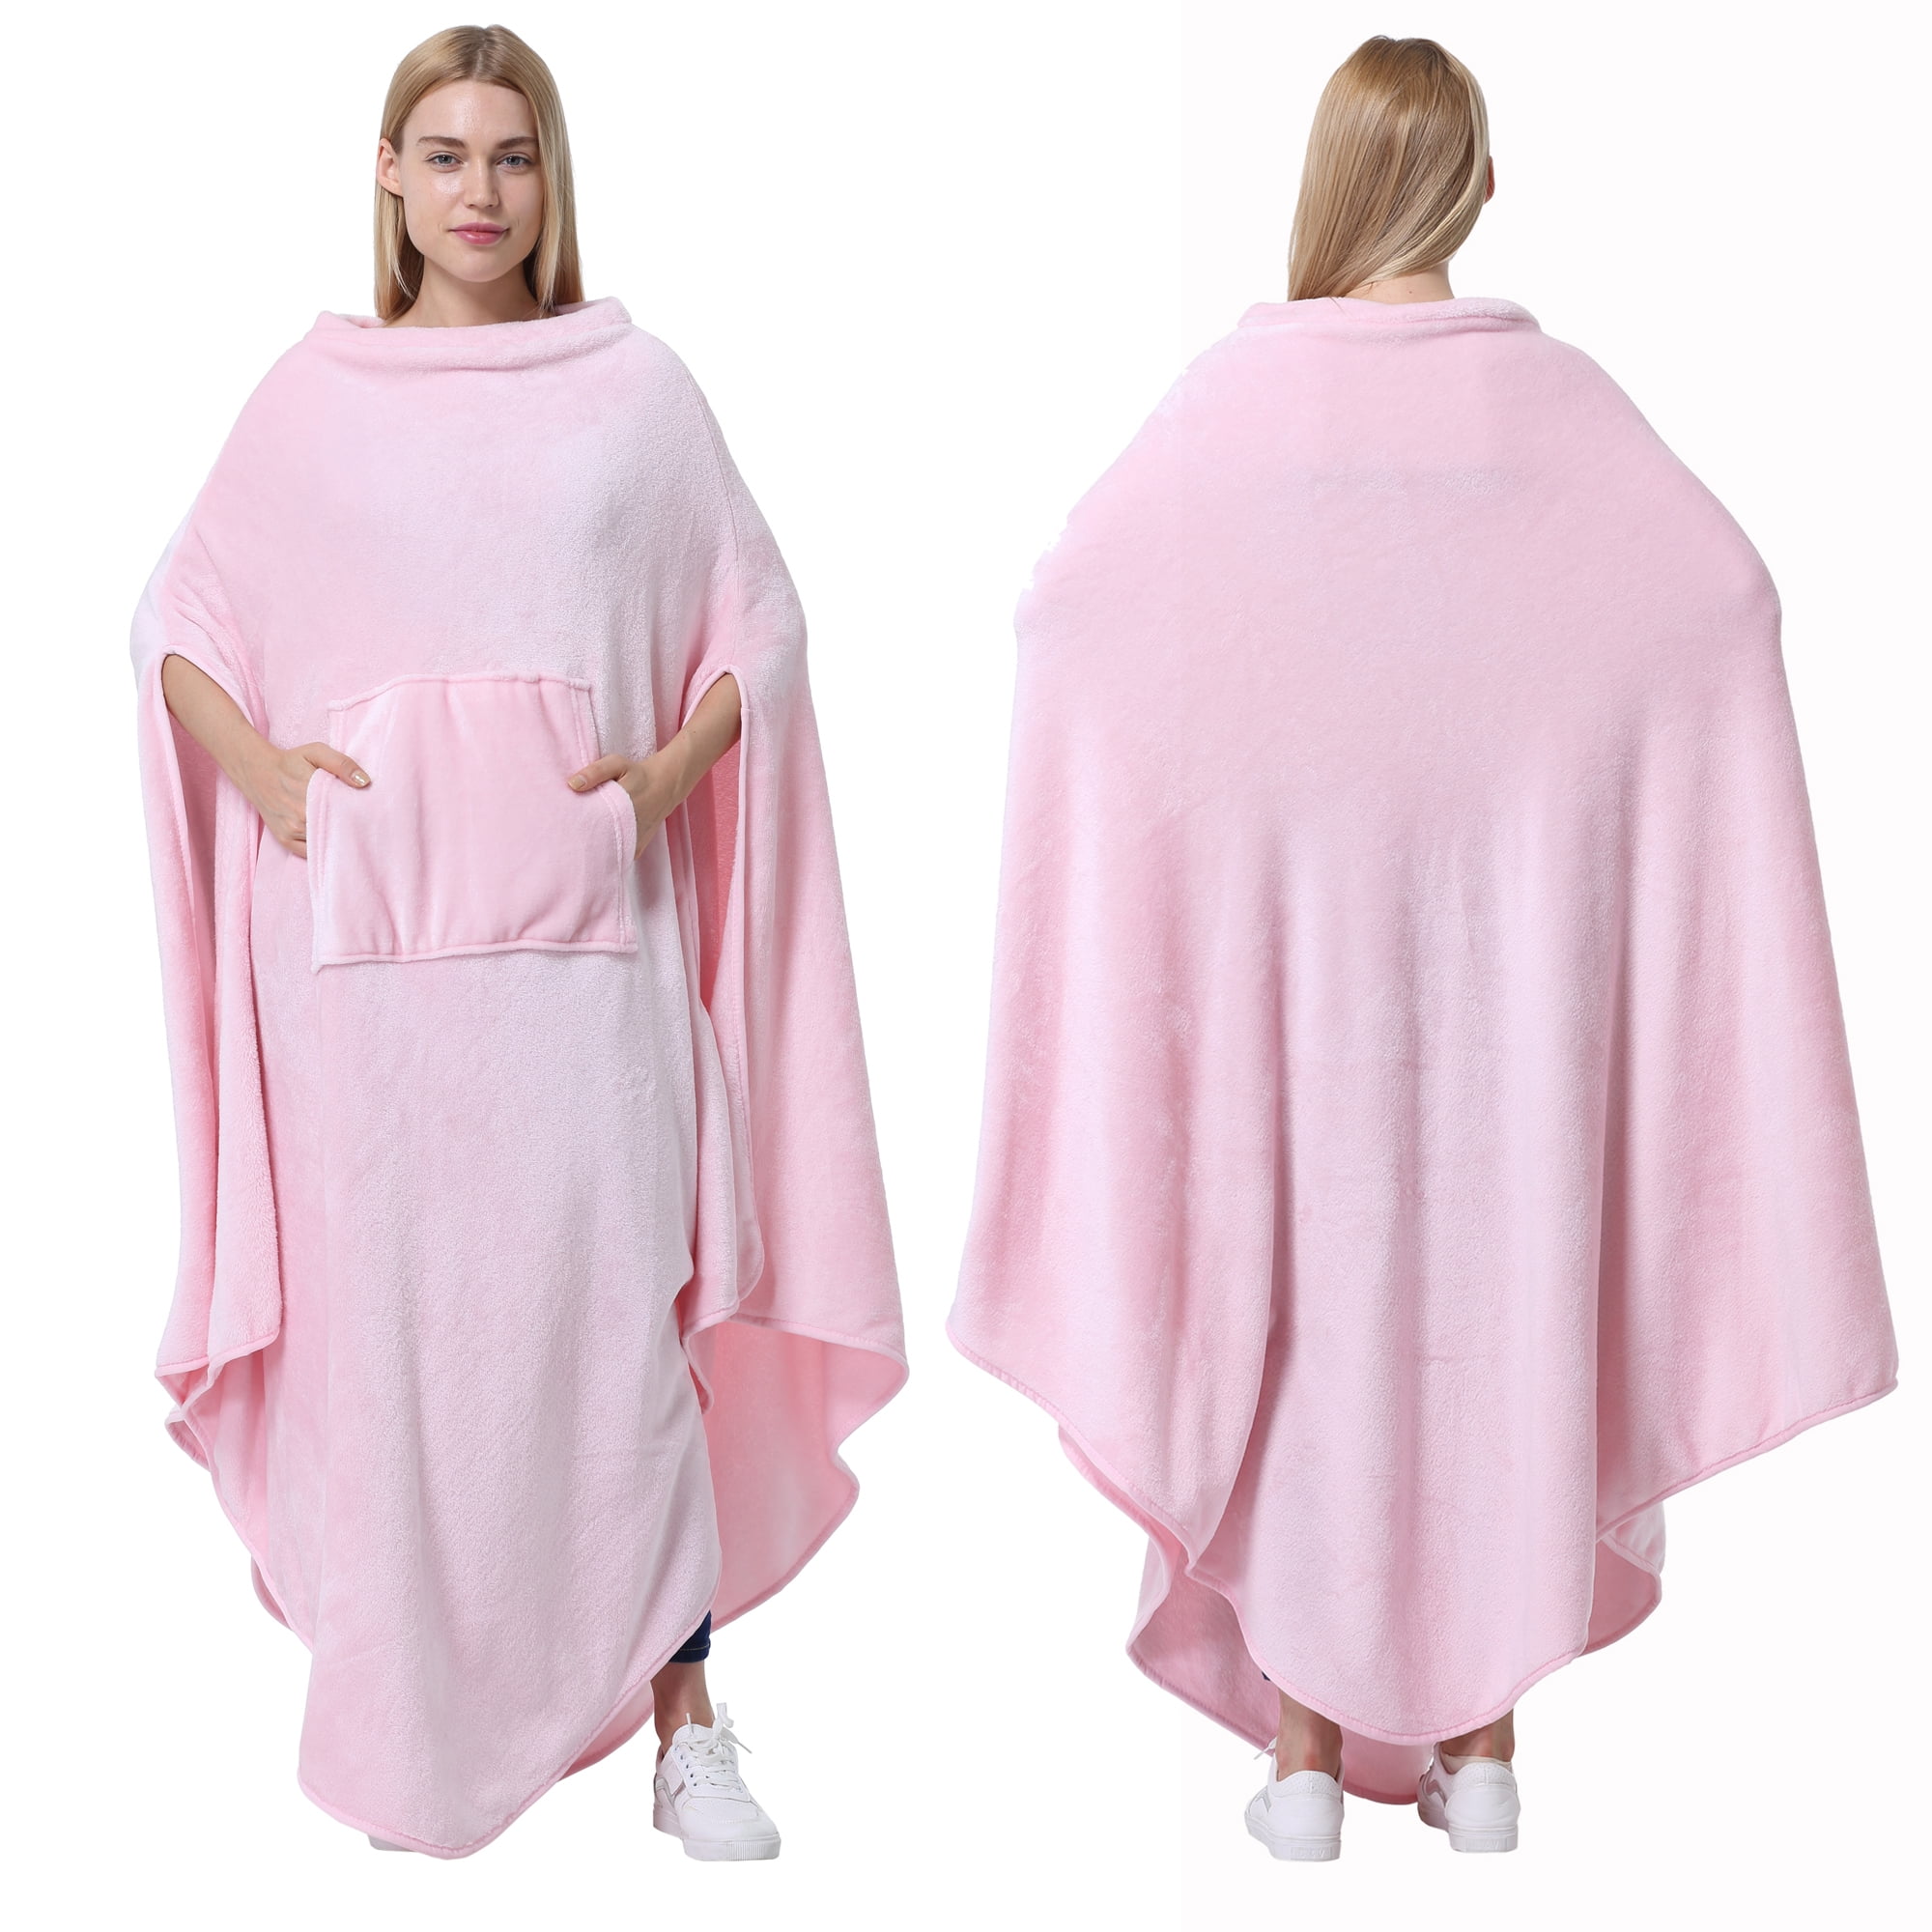 BULK BUY Fleece Ponchos blankets to keep your guests warm summer party/Wedding 